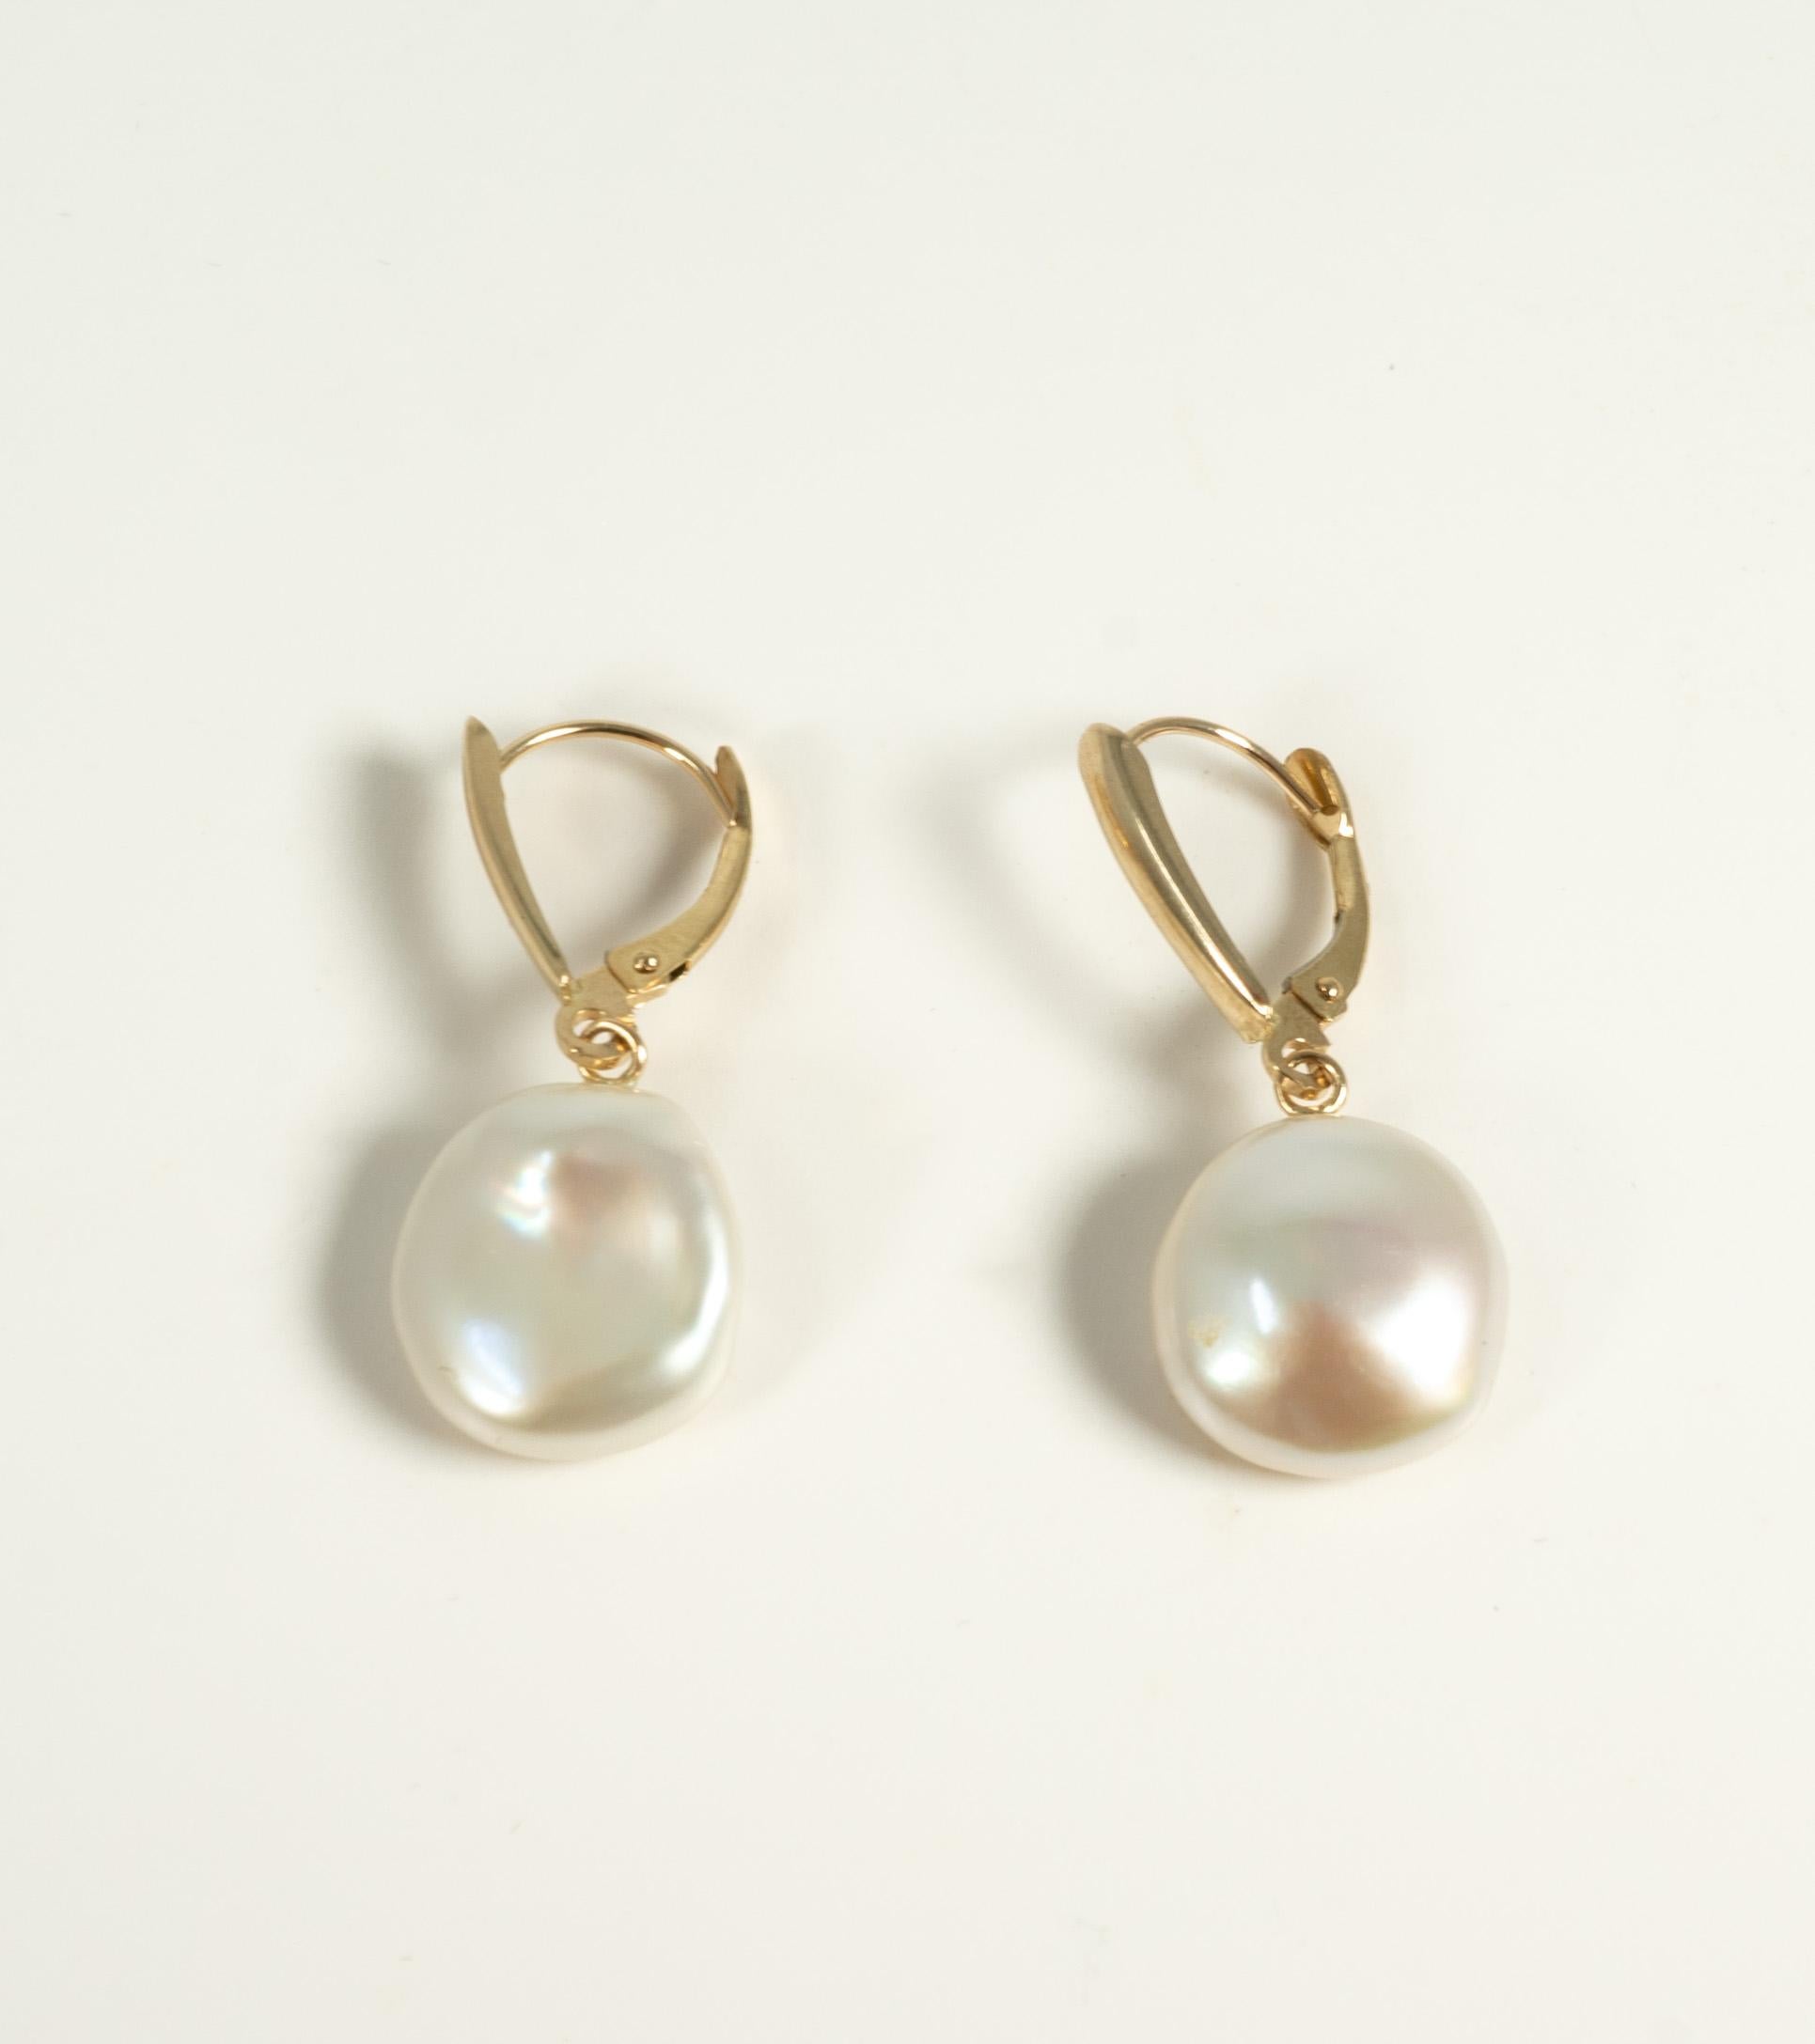 Manufactured by Honora, these 14 karat yellow gold earrings are secured with a lever back and suspend freshwater coin pearls.